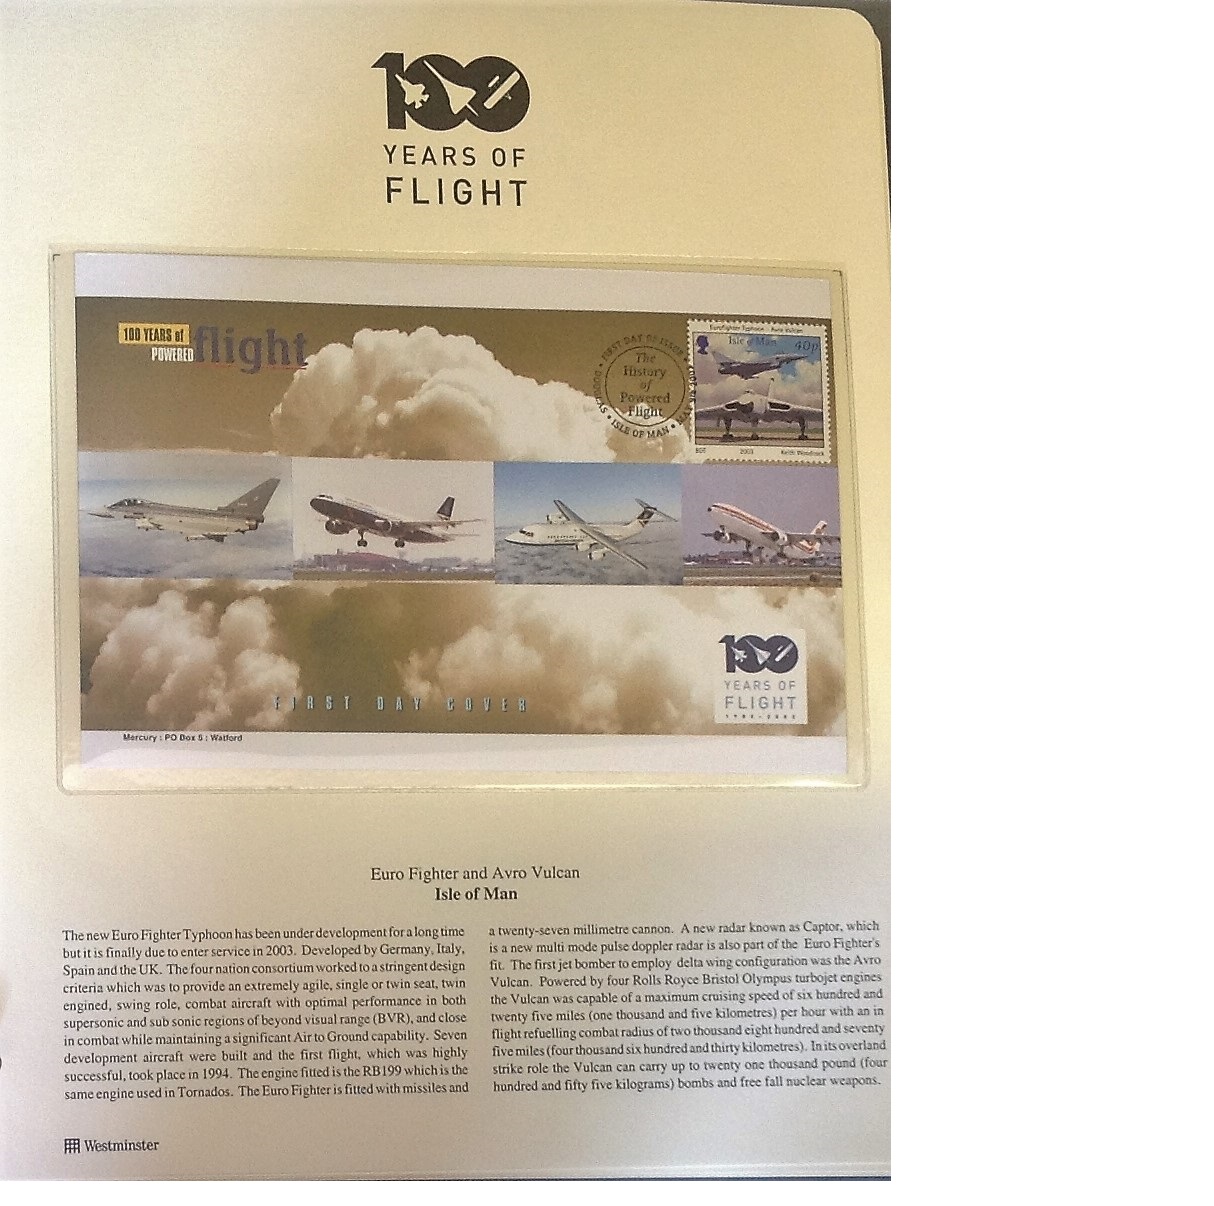 Aviation collection 100 years of flight includes 23 FDC and Coin covers featuring iconic planes - Image 5 of 8